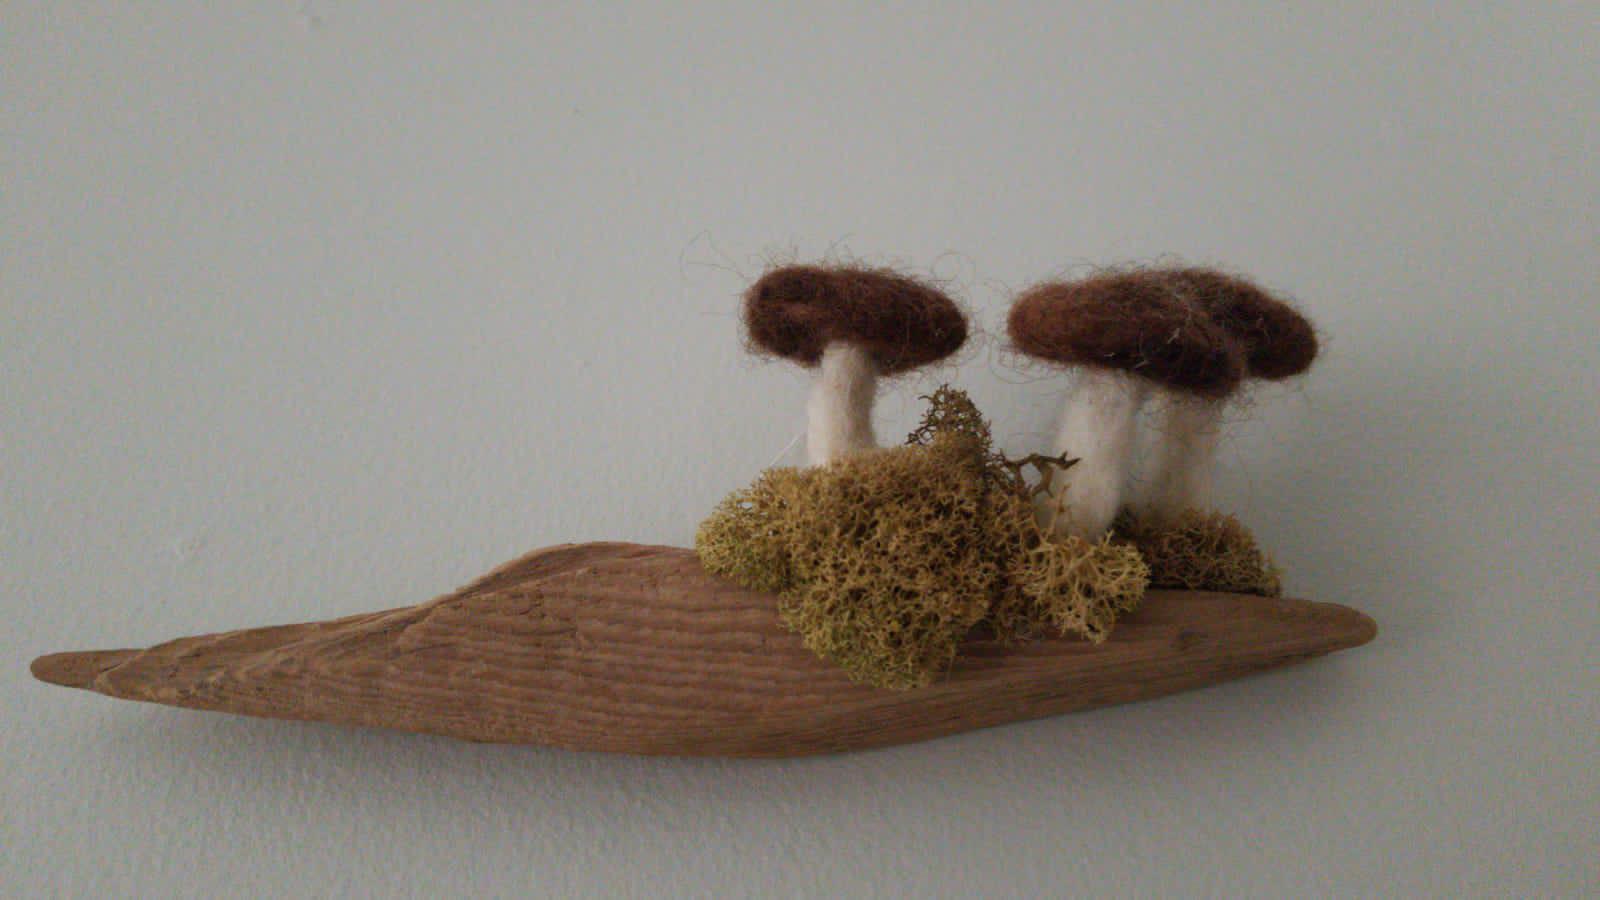 Found out my friend is a goblin mushroom art from her house!